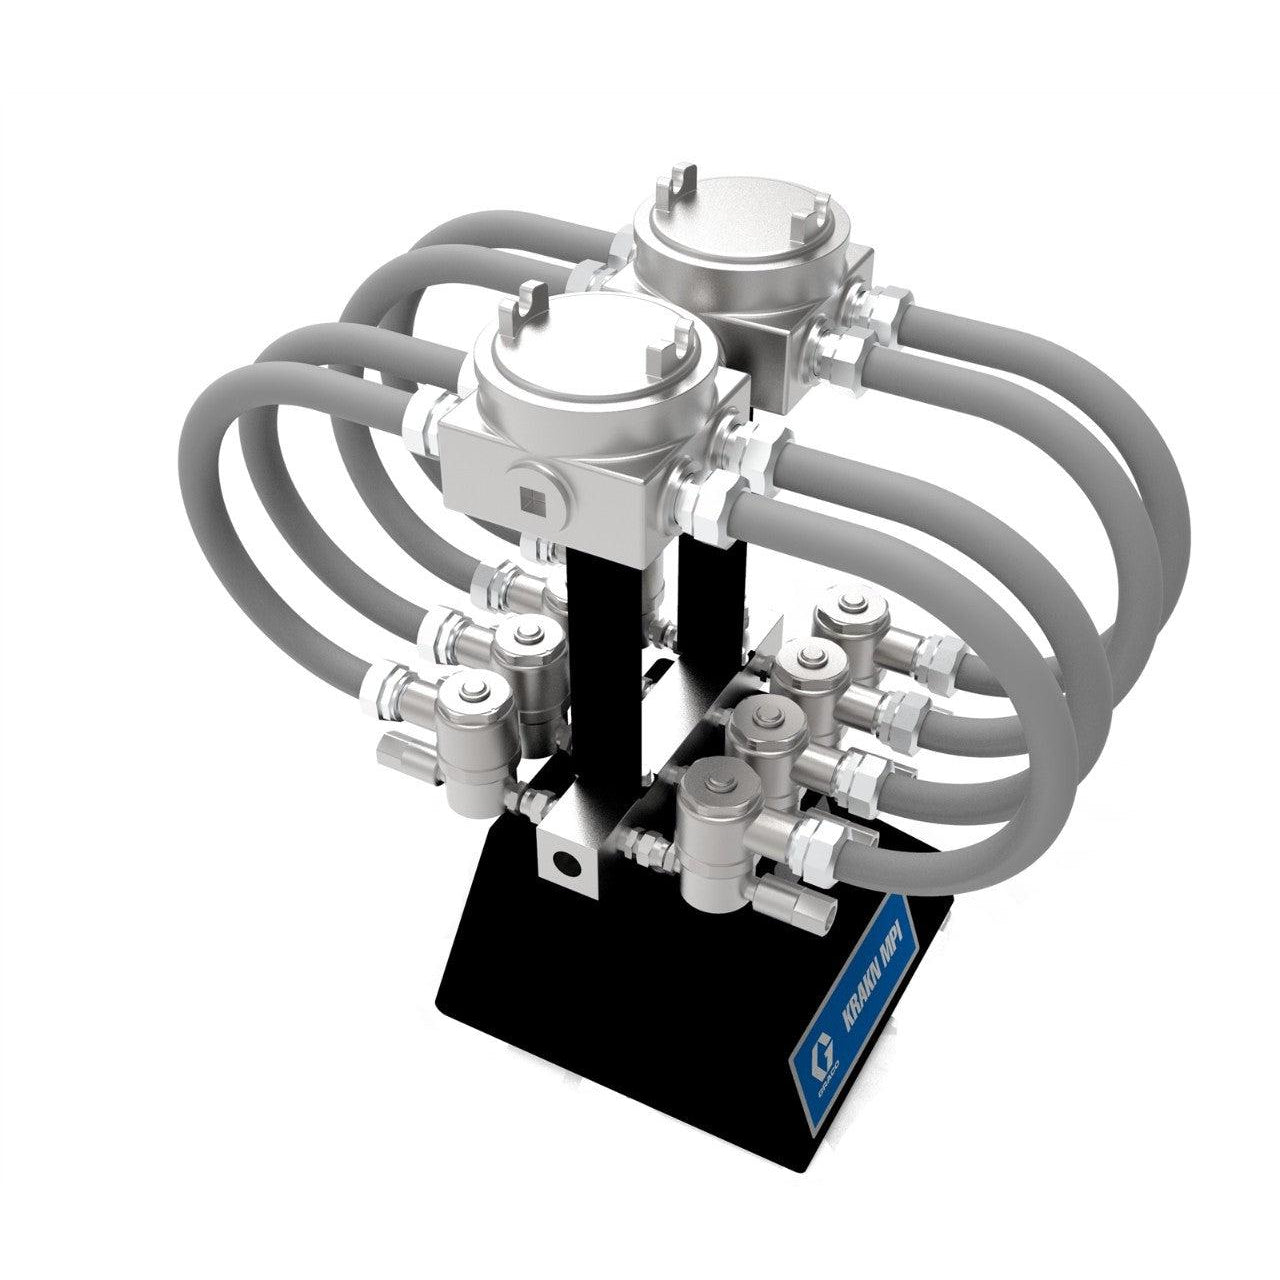 6 valve KRAKN MPI fluid manifold assembly, Class 1, Division 1 approved for Hazardous Locations